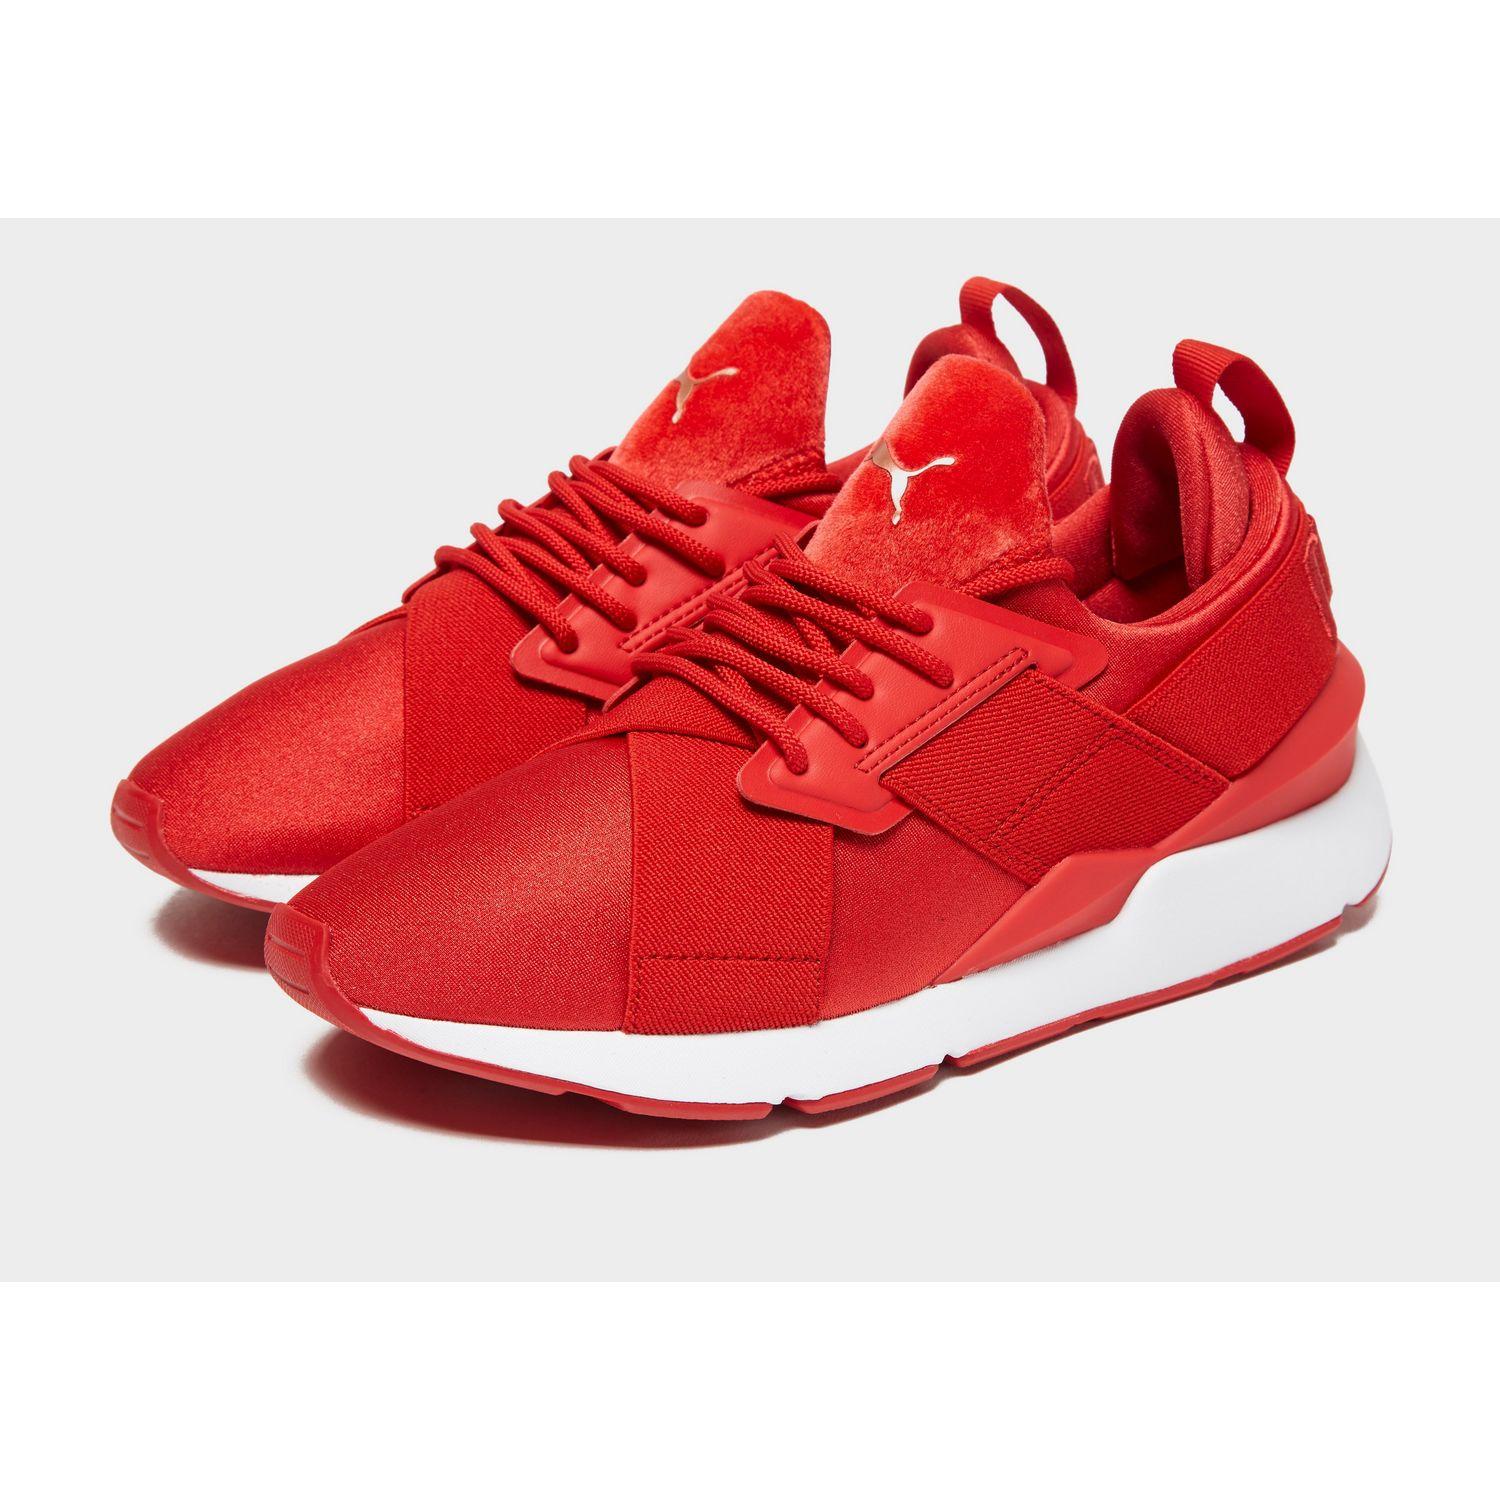 PUMA Muse Satin Ii in Red/White (Red) - Lyst